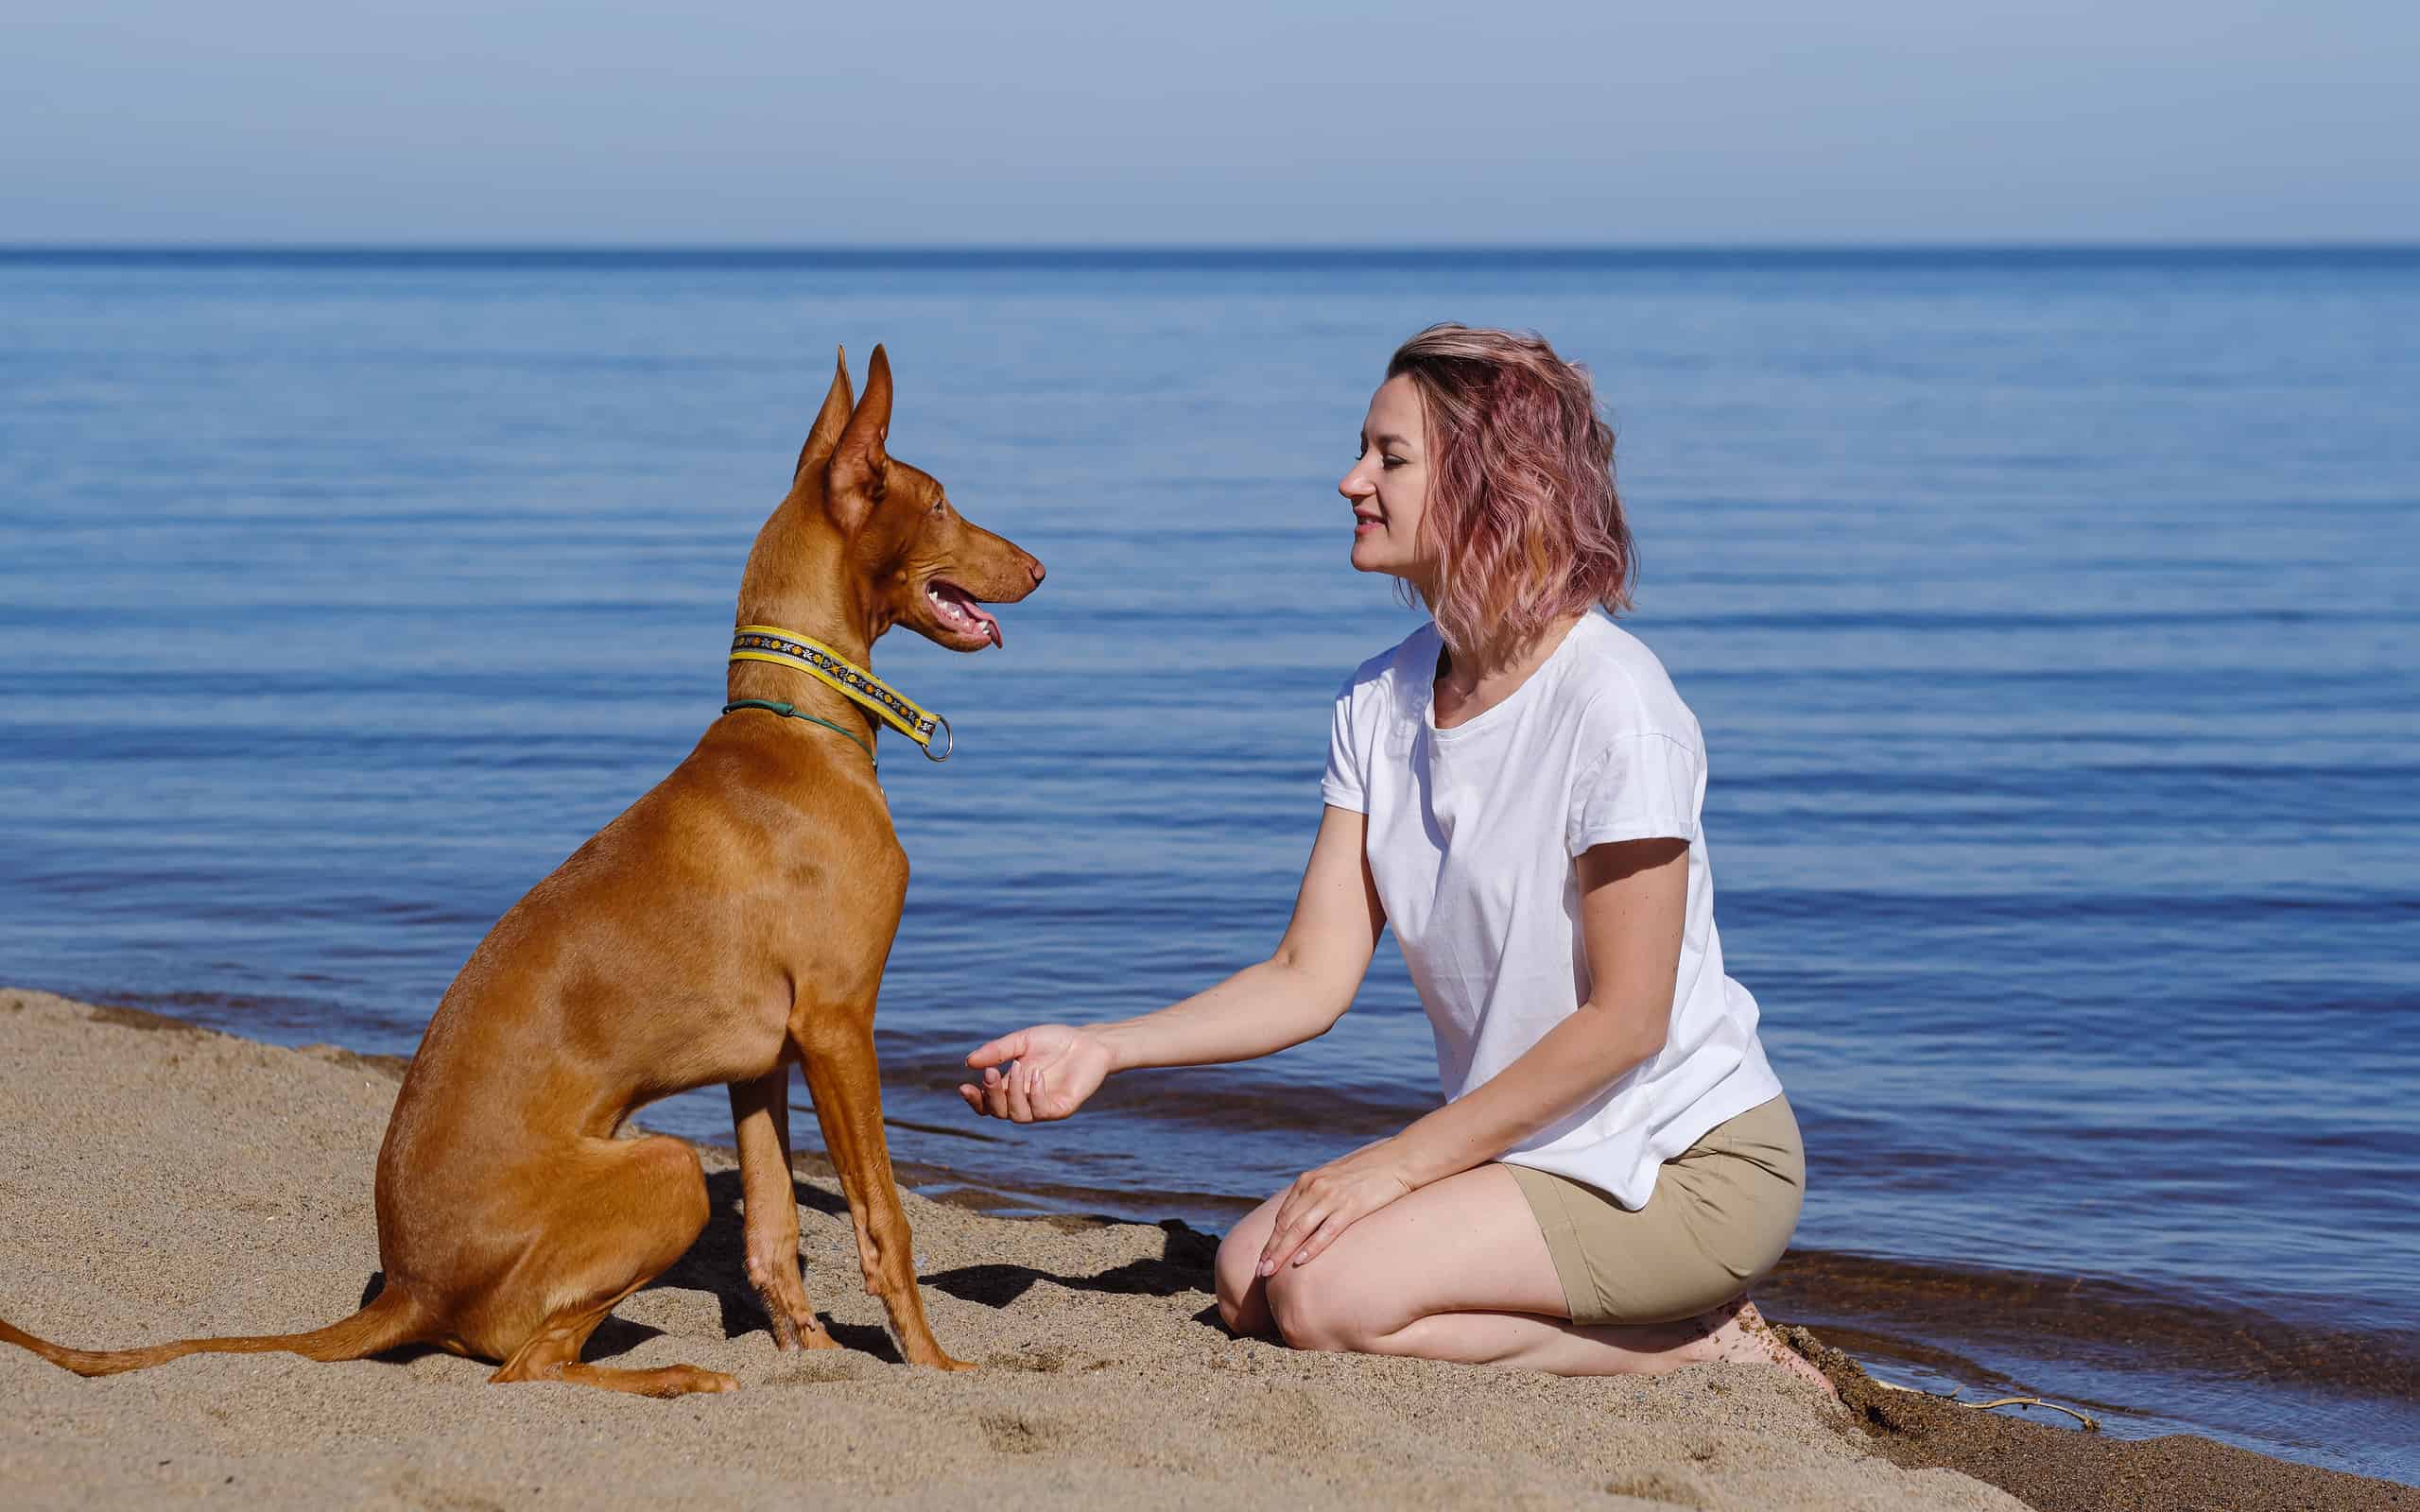 The pharaoh breed greyhound dog with the female owner plays and walks in nature. Seaside. Daytime blue sky. Friendship between animal and human.